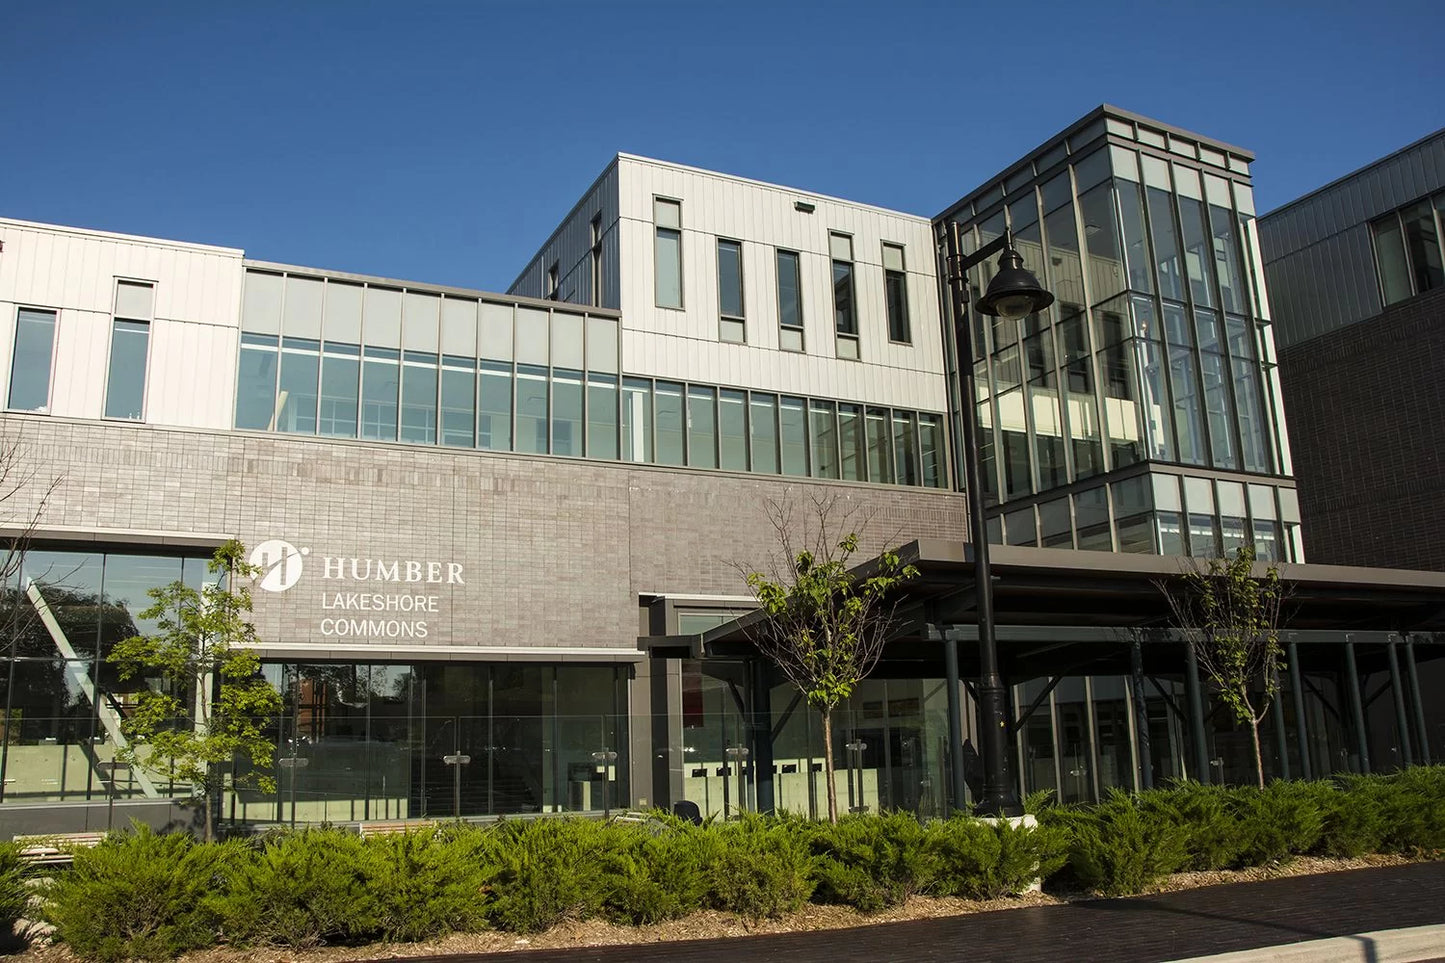 Humber Institute of Technology & Advanced Learning